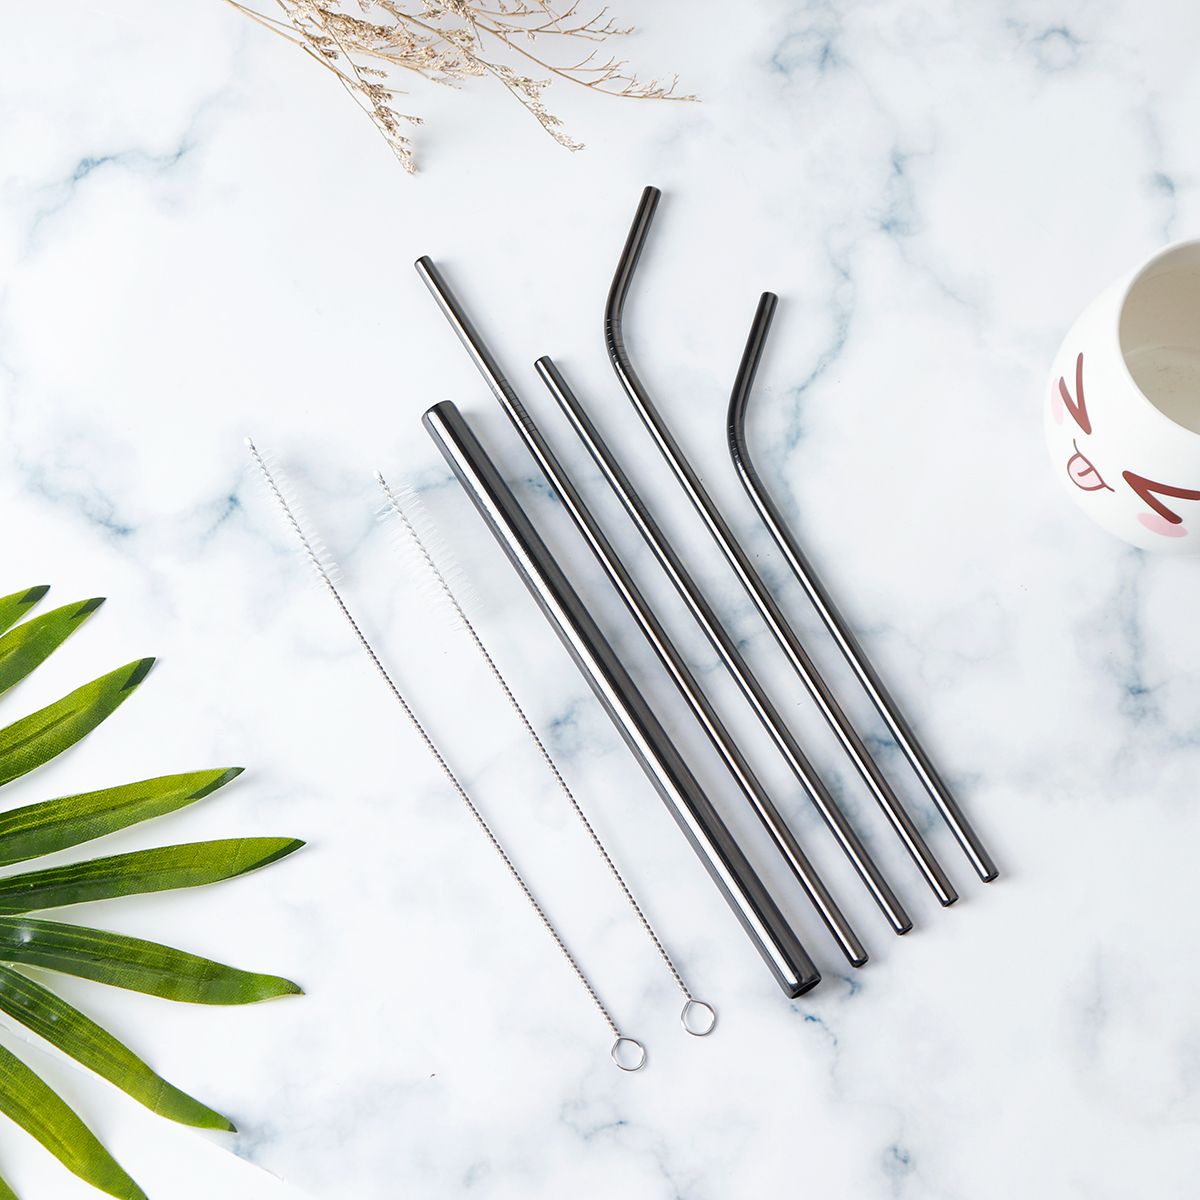 Portable-Metal-Straw-Set-304-Stainless-Steel-Straws-Reusable-Metal-Drinking-Straws-With-Cleaning-Bru-1532046-5